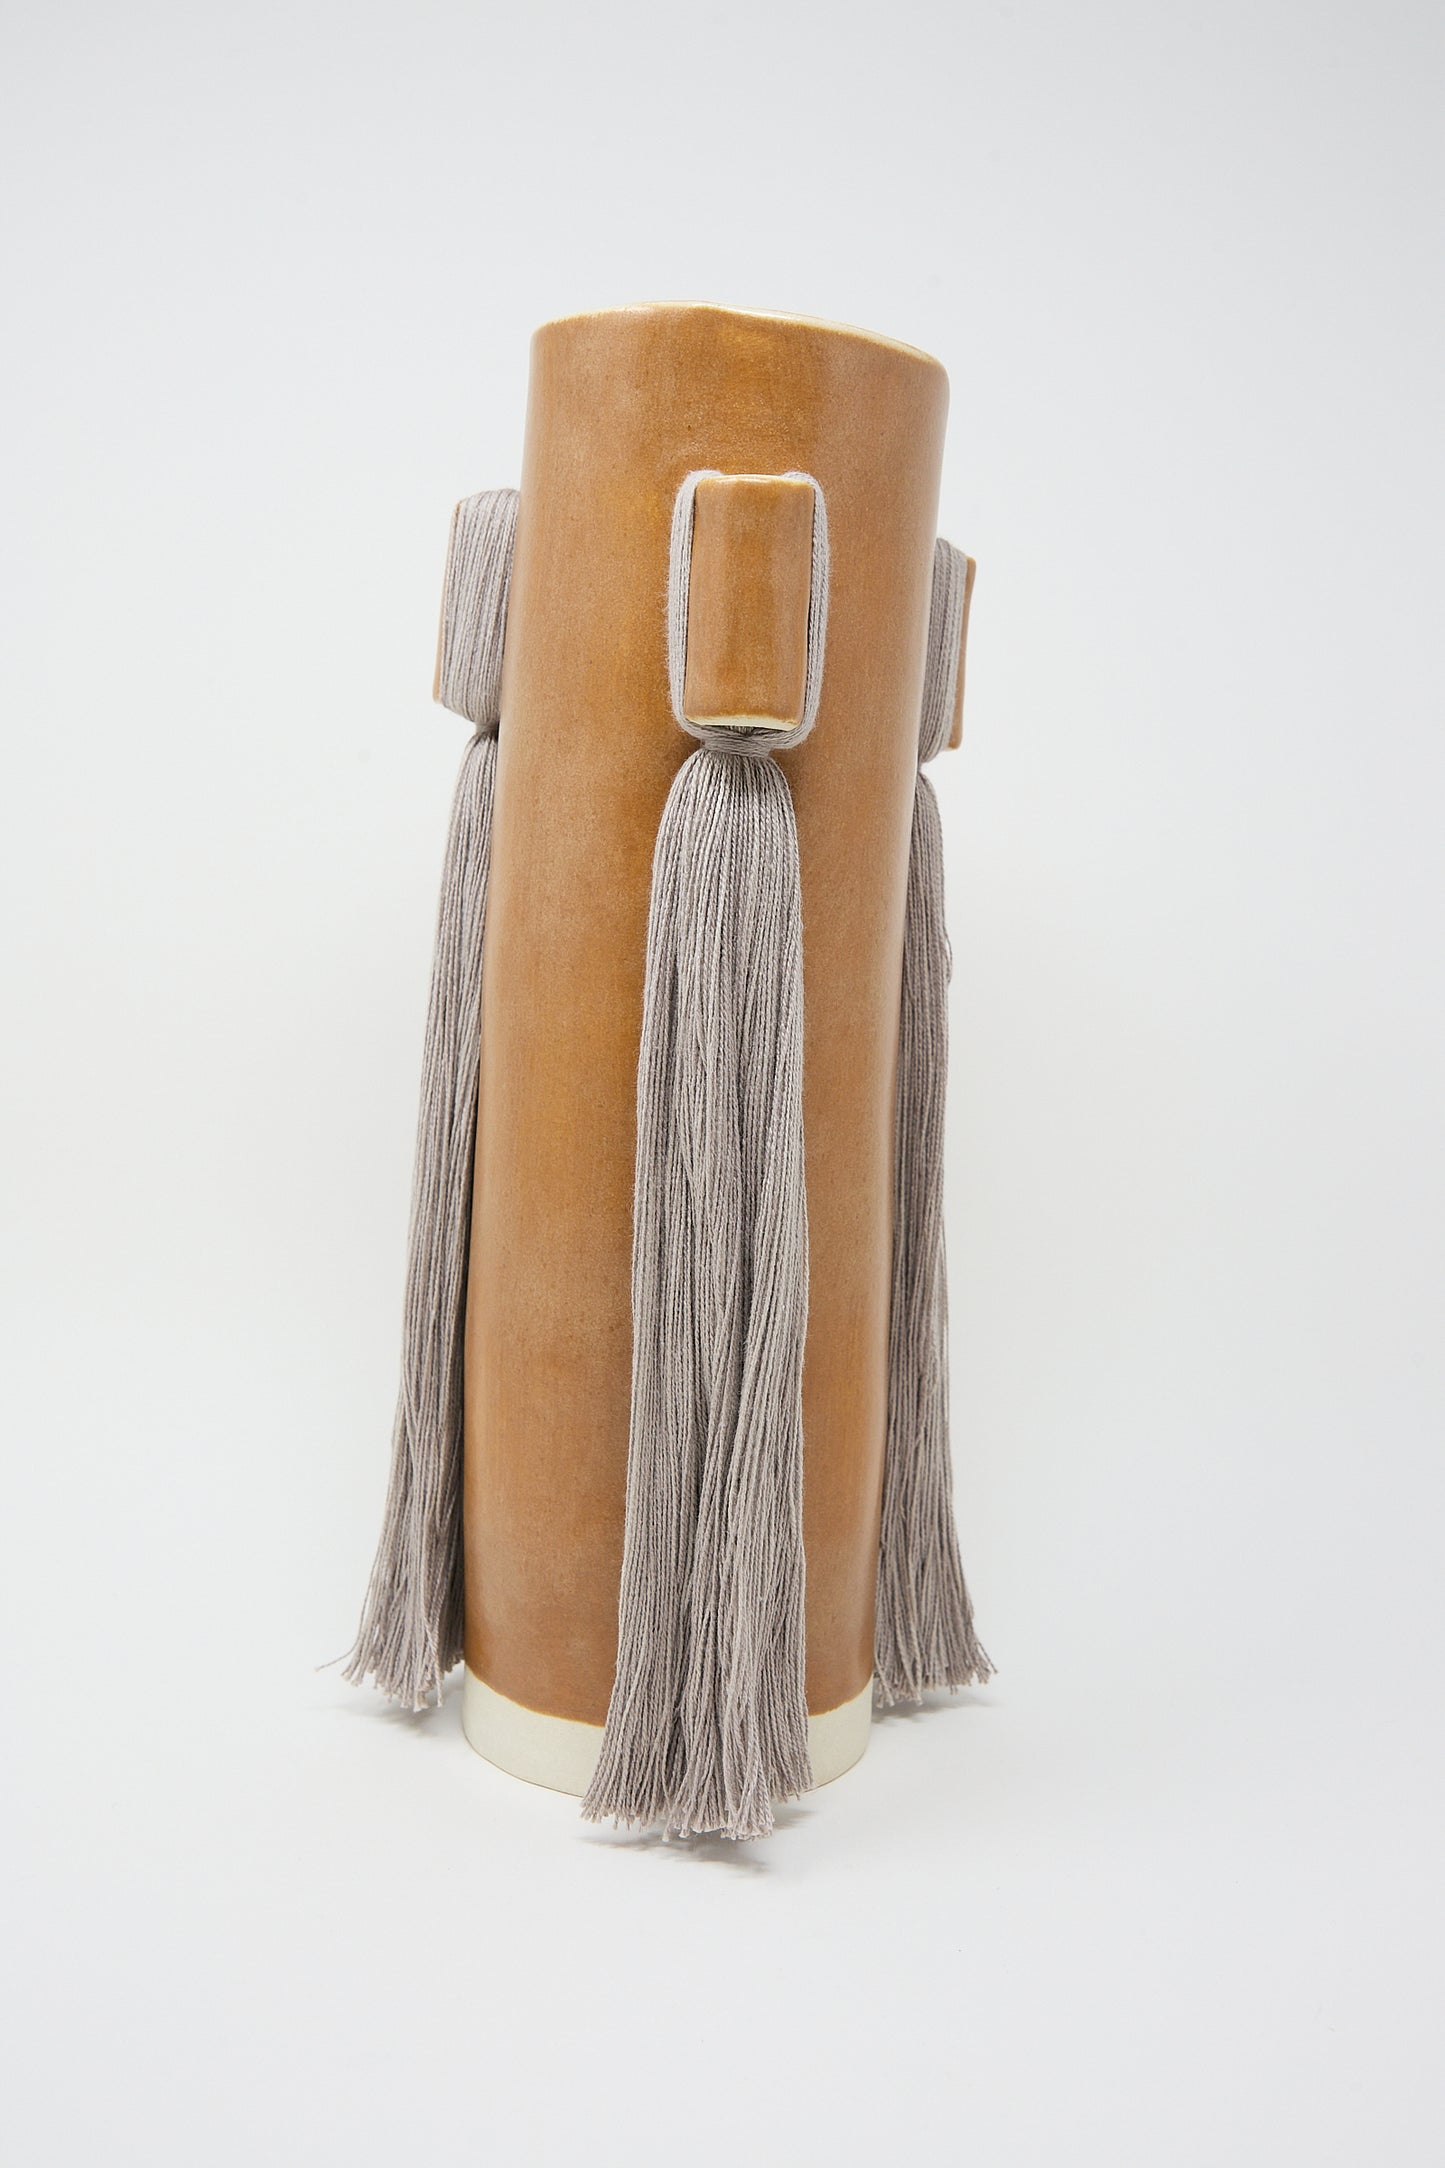 Handcrafted Vase #607 in Brown stoneware vase with tassel details by Karen Tinney on a white background.